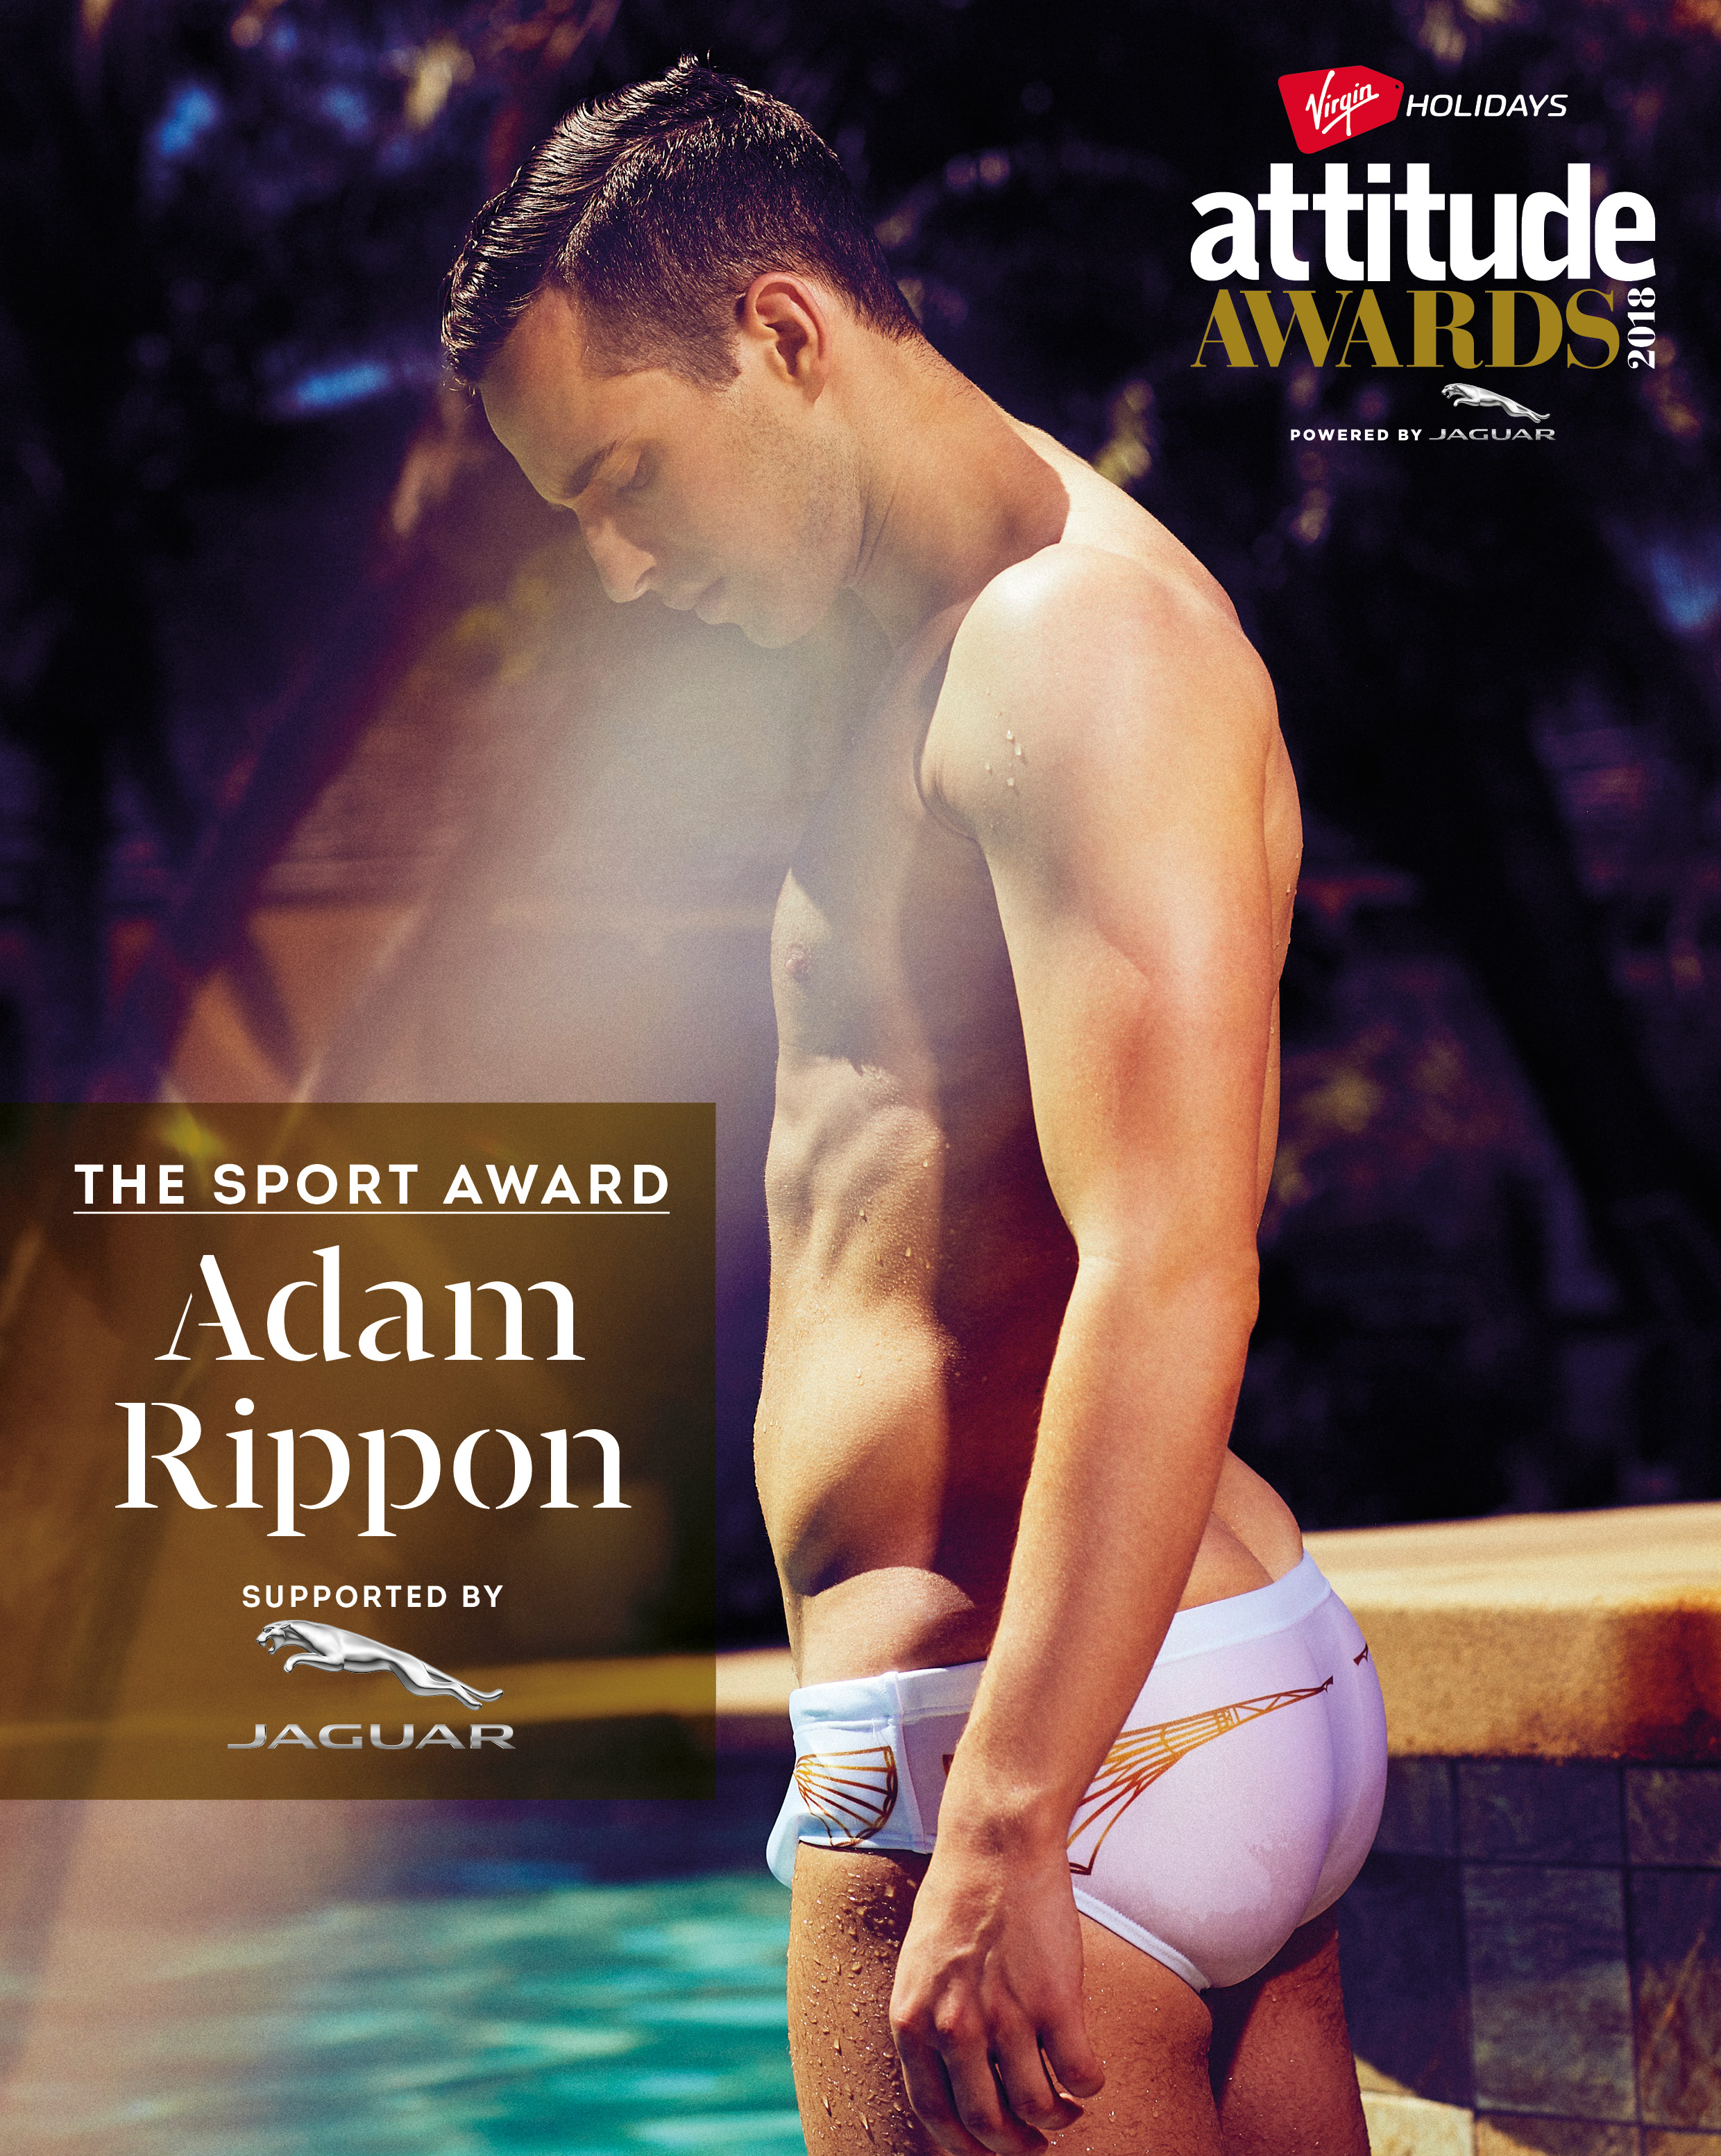 charlene mary ann sexon recommends adam rippon bulge pic